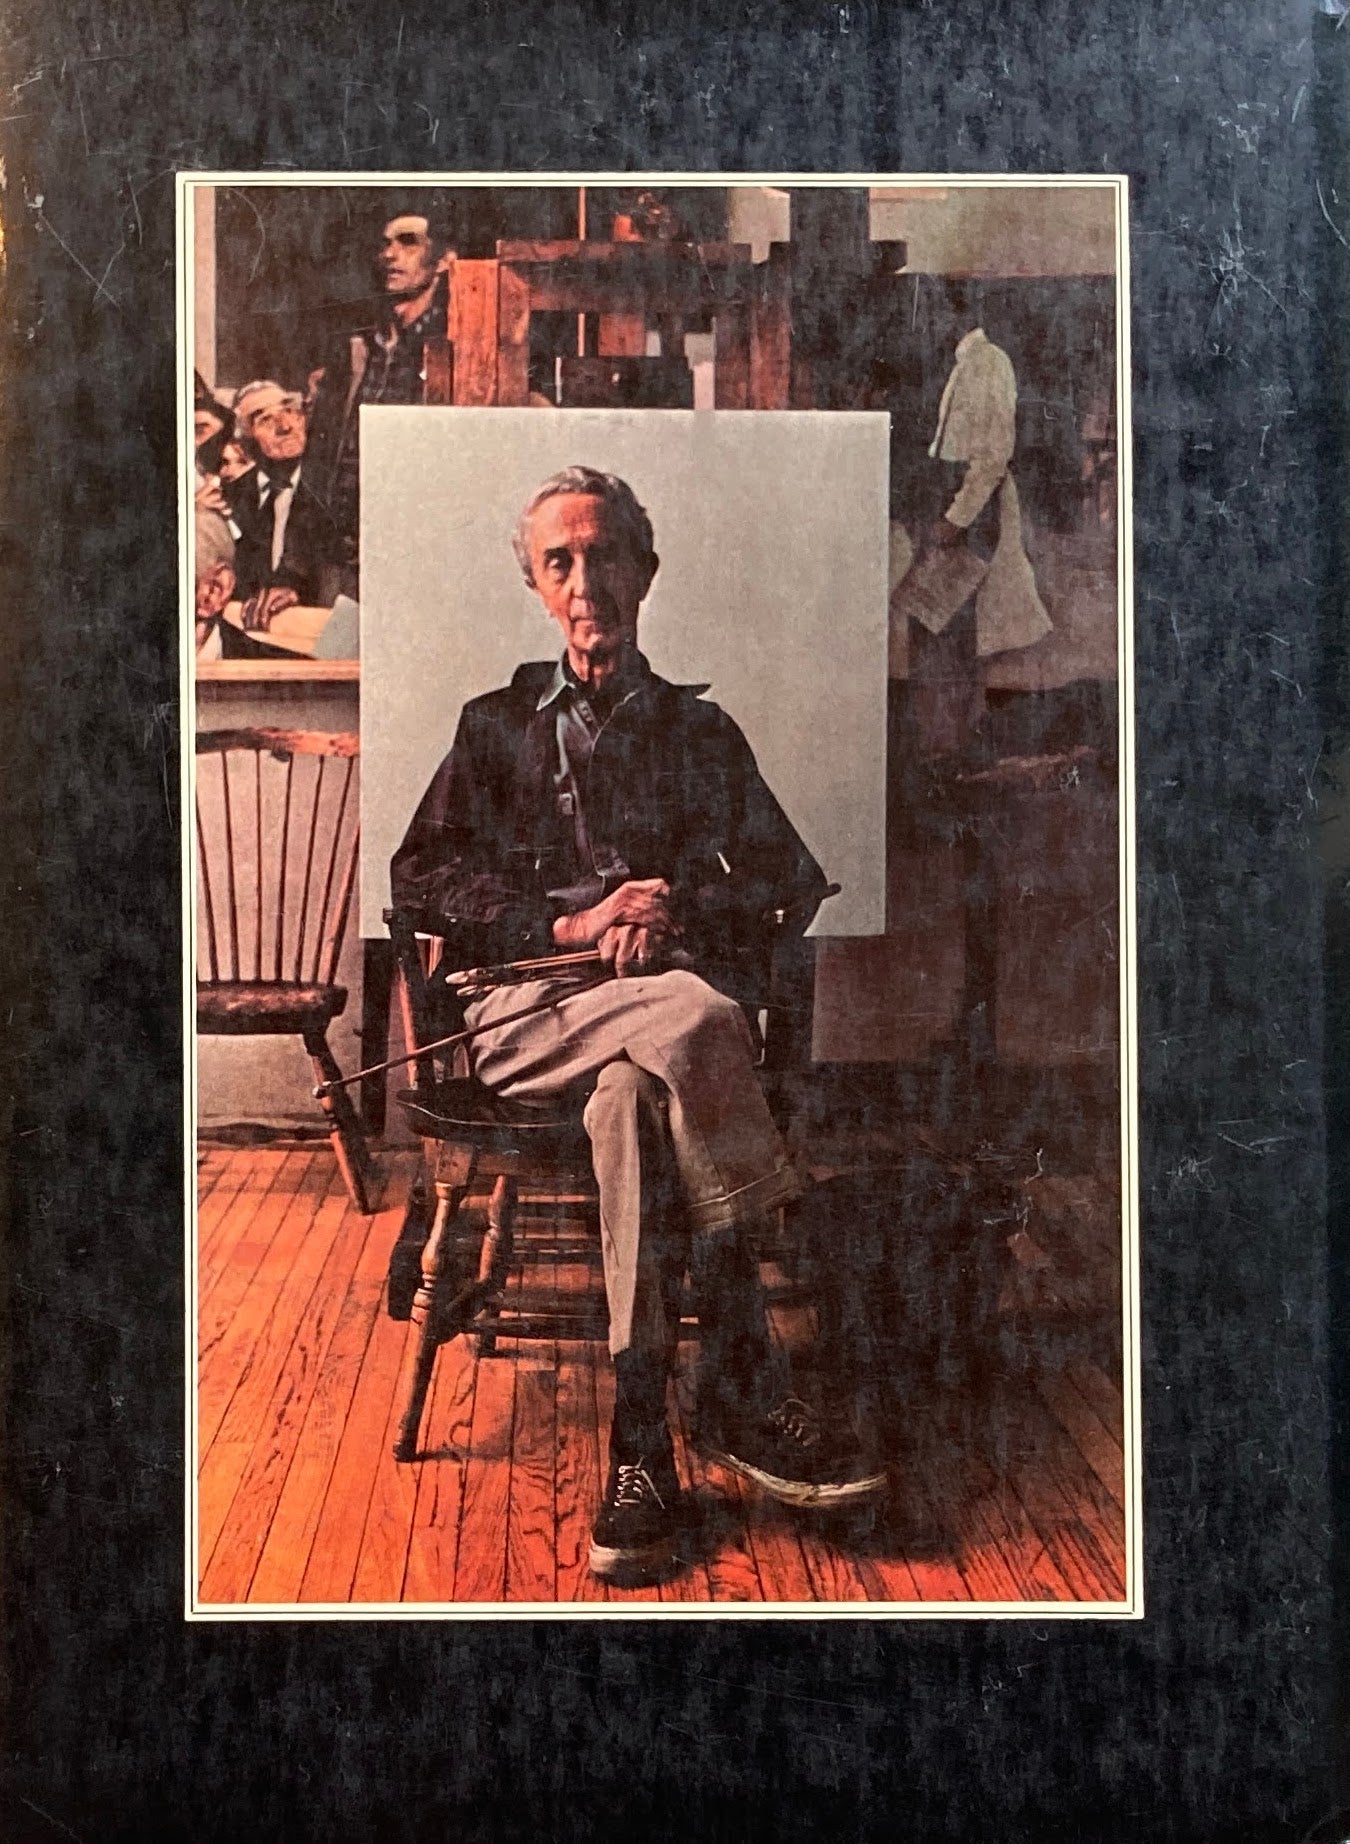 Norman Rockwell and the Saturday Evening Post 1916-1928　ノーマン・ロックウェル